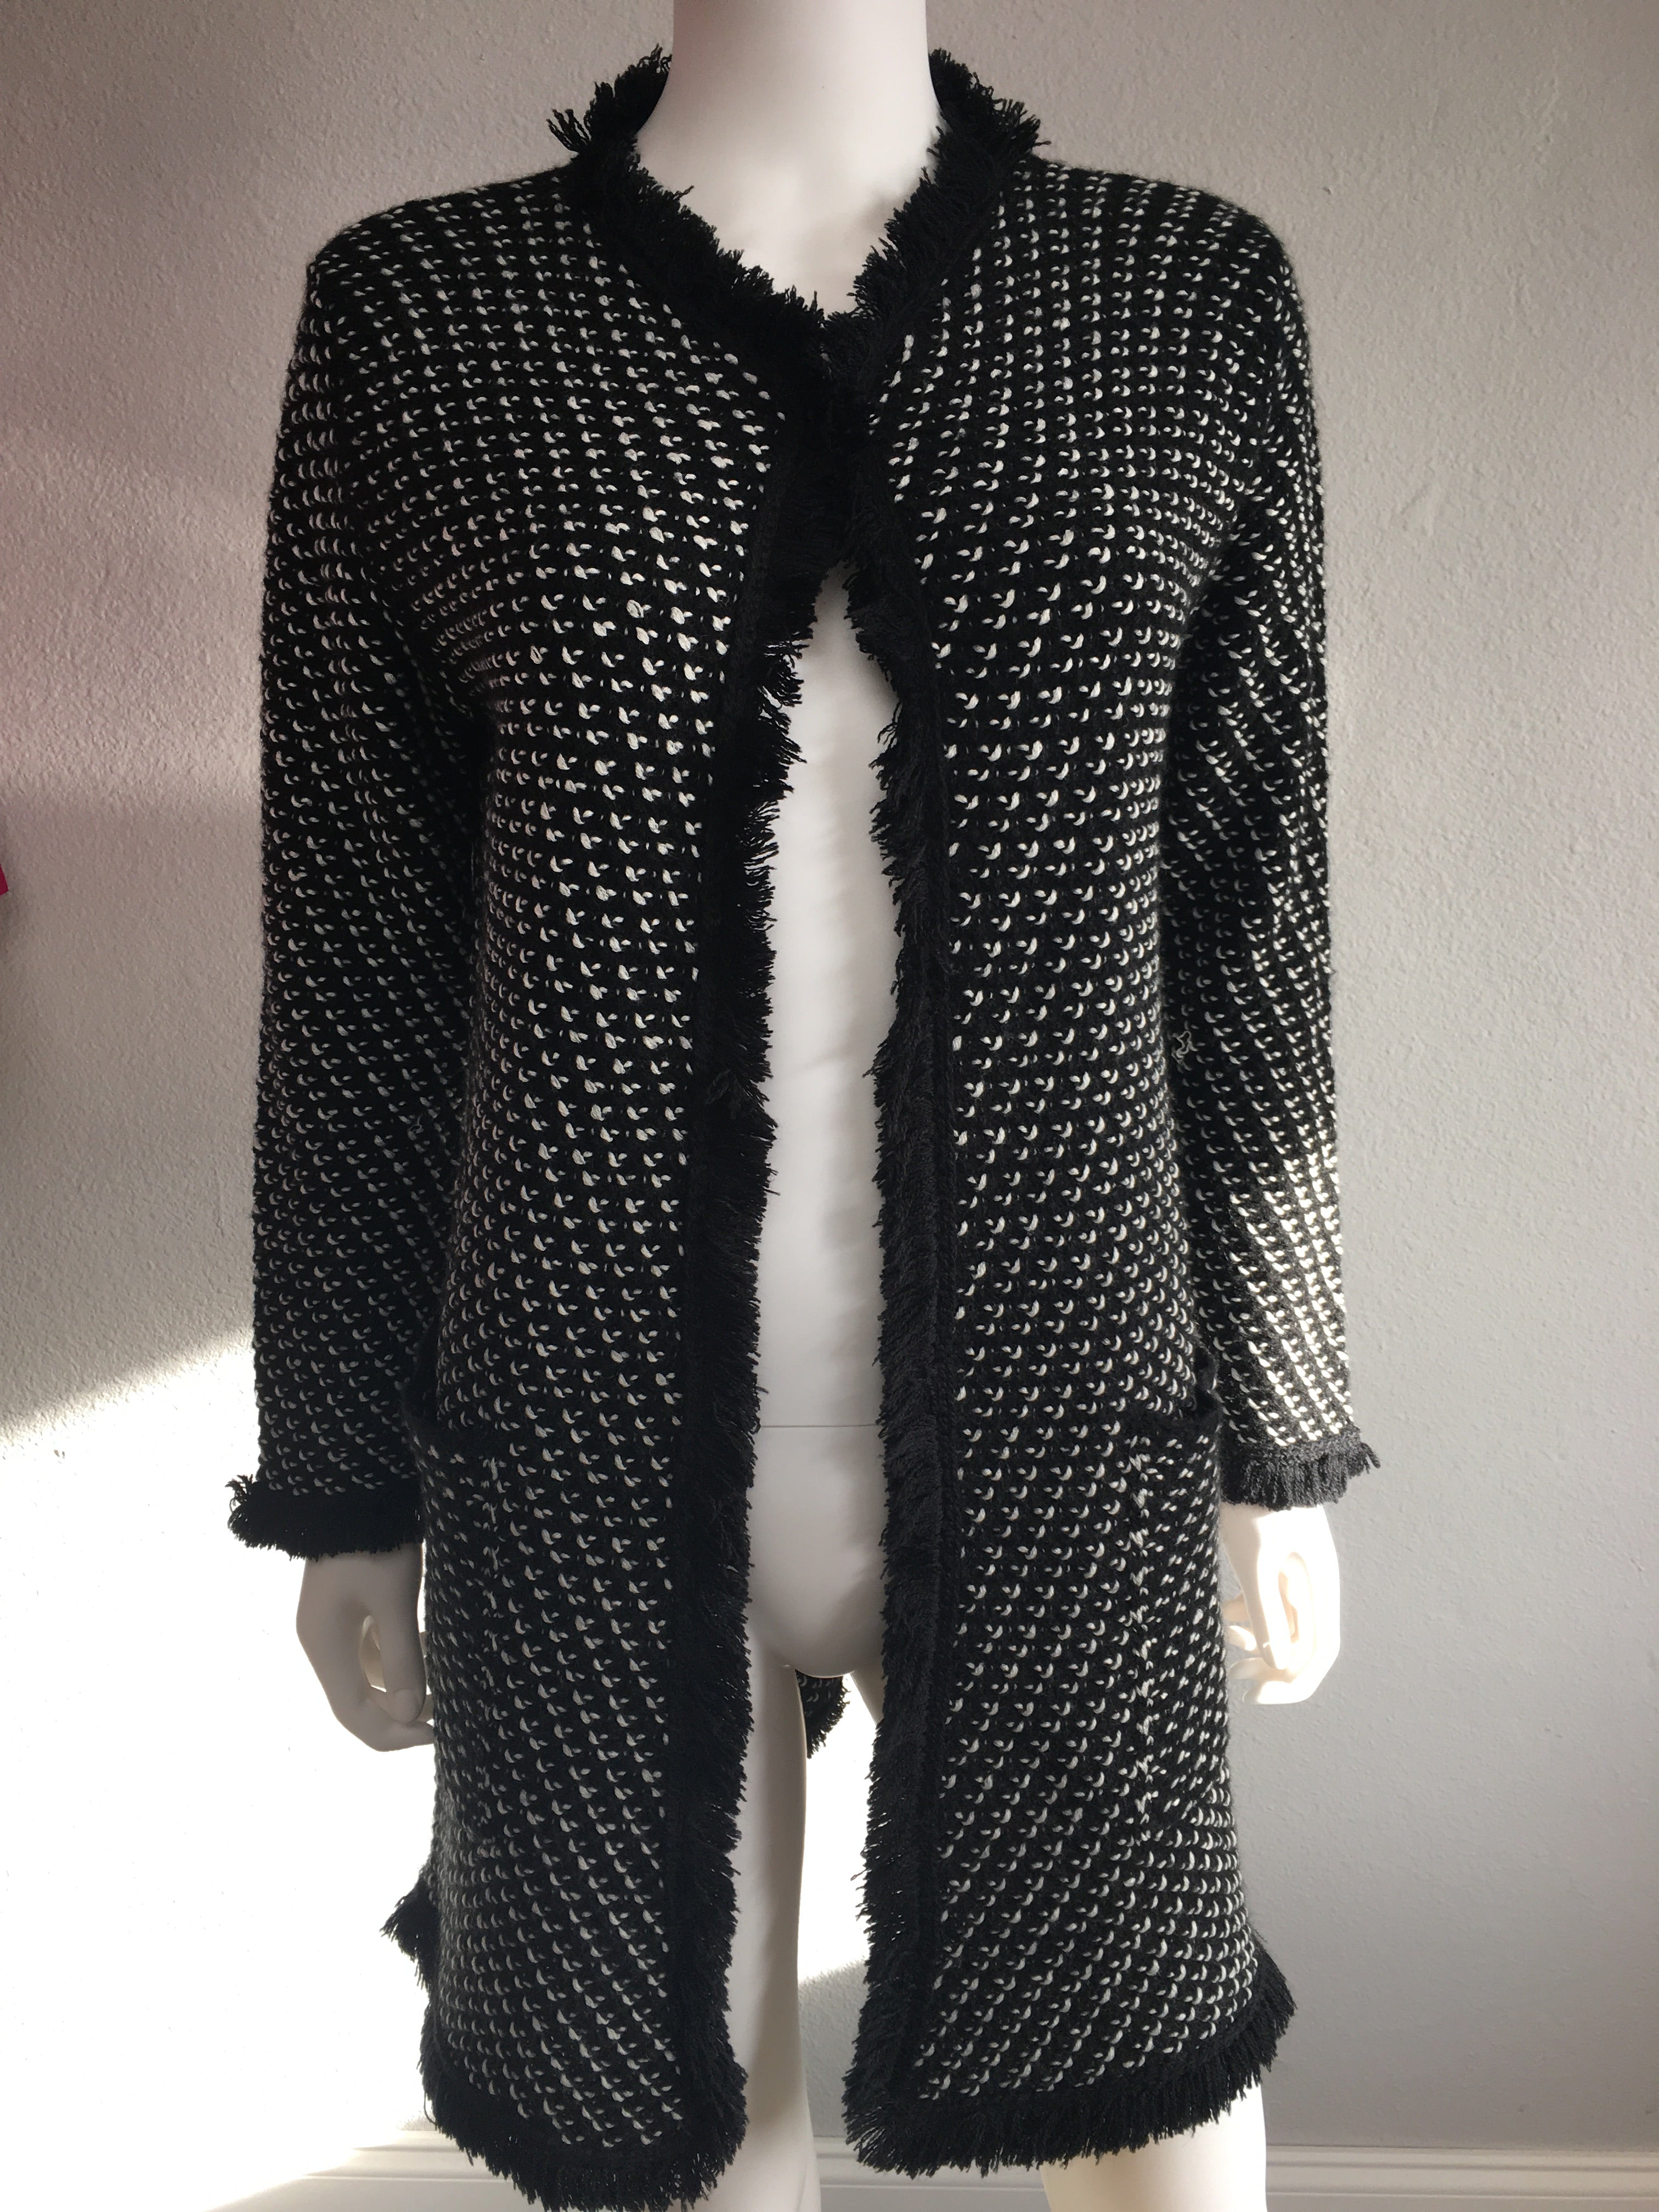 Black and white knitted sweater - Vanity's Vault